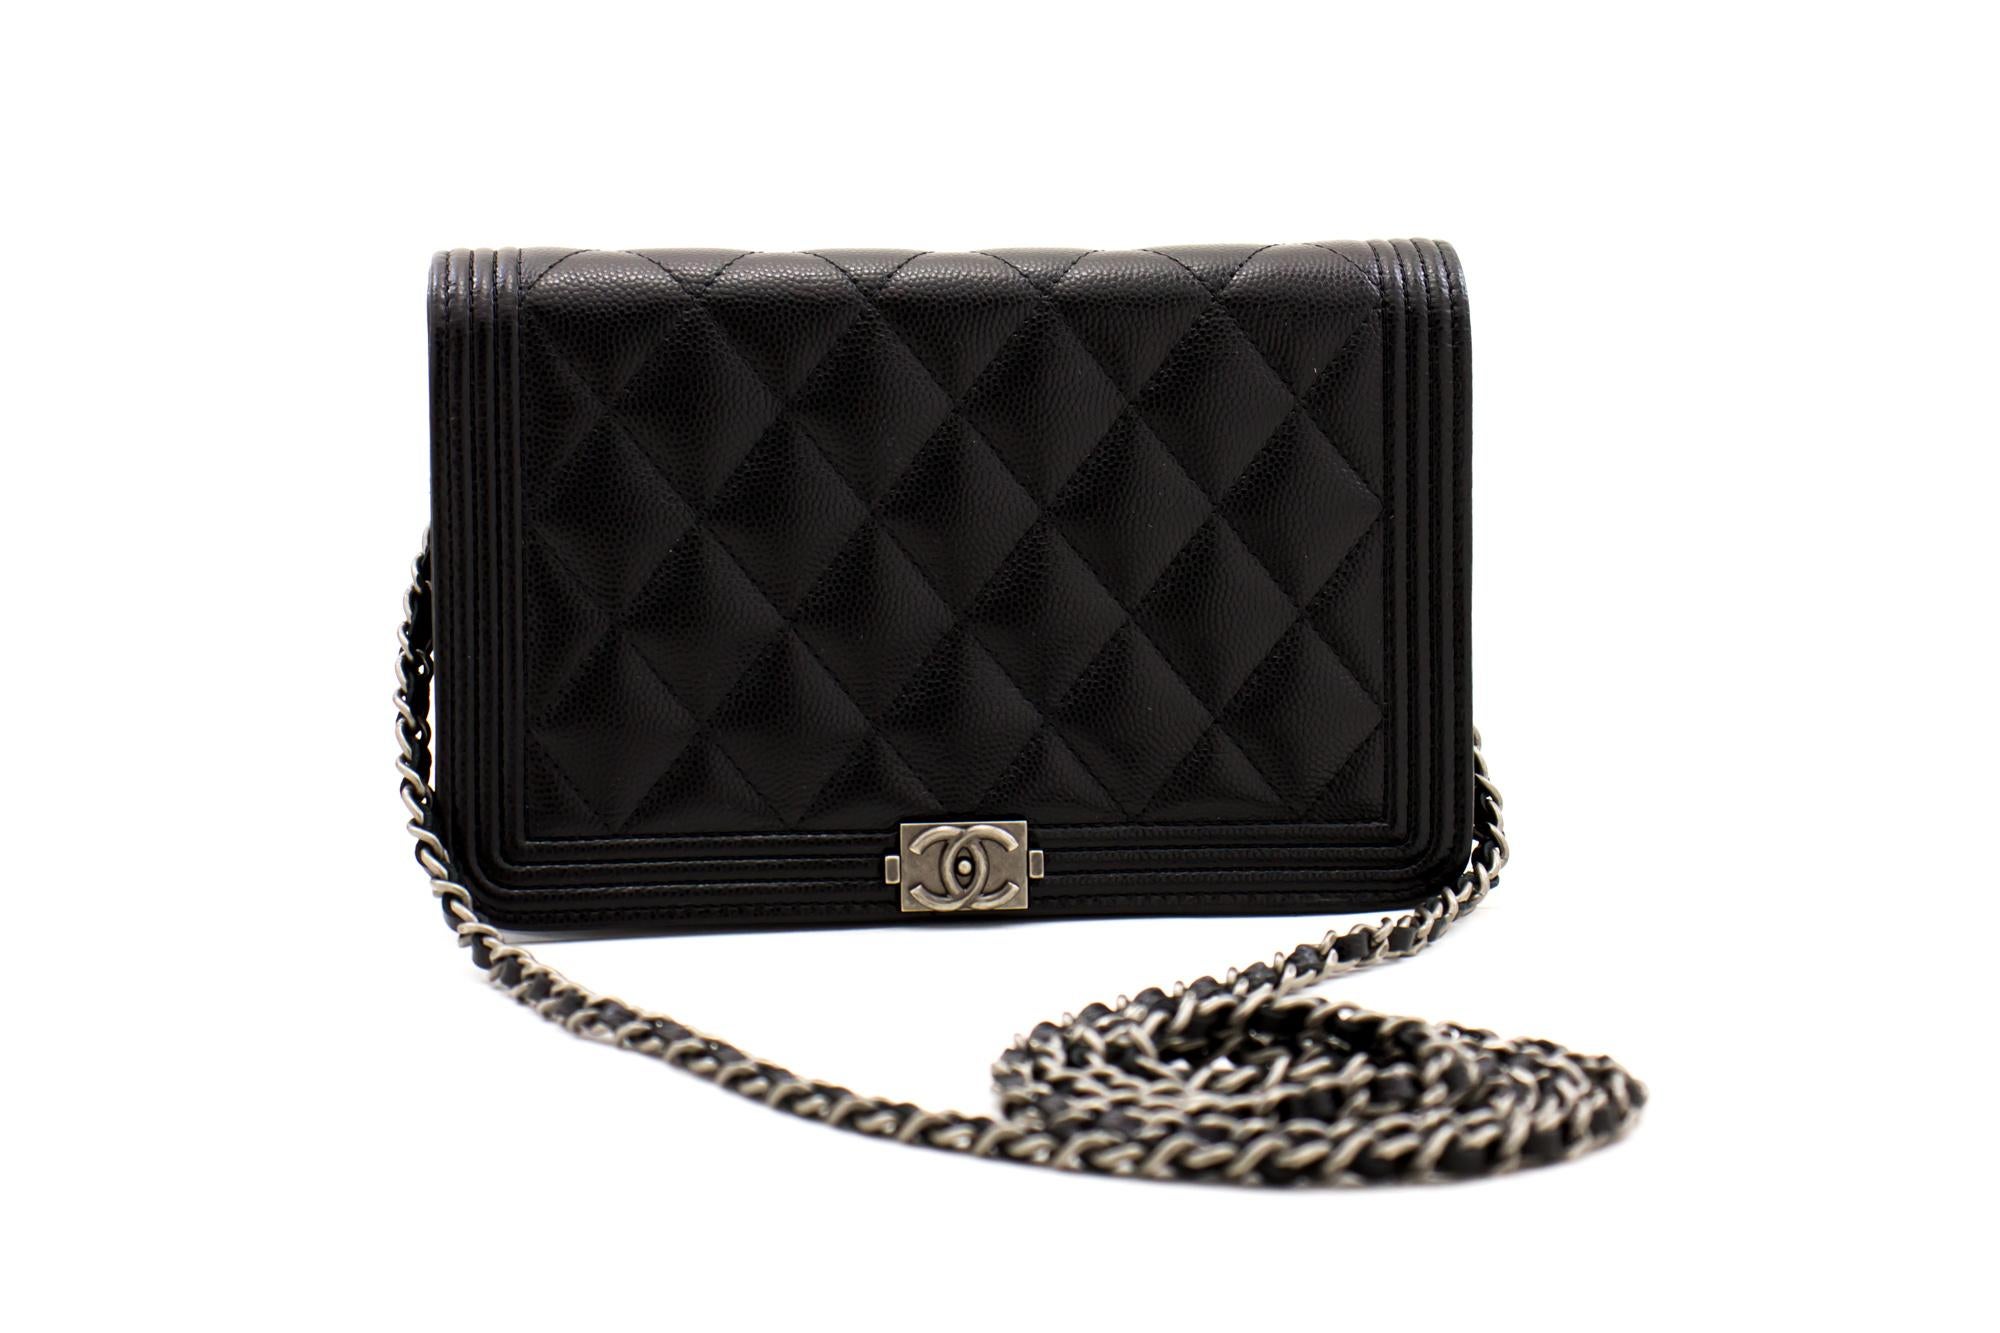 An authentic CHANEL Boy Black Caviar Flap Wallet On Chain WOC Shoulder Bag. The color is Black. The outside material is Leather. The pattern is Solid. This item is Contemporary. The year of manufacture would be 2018.
Conditions & Ratings
Outside